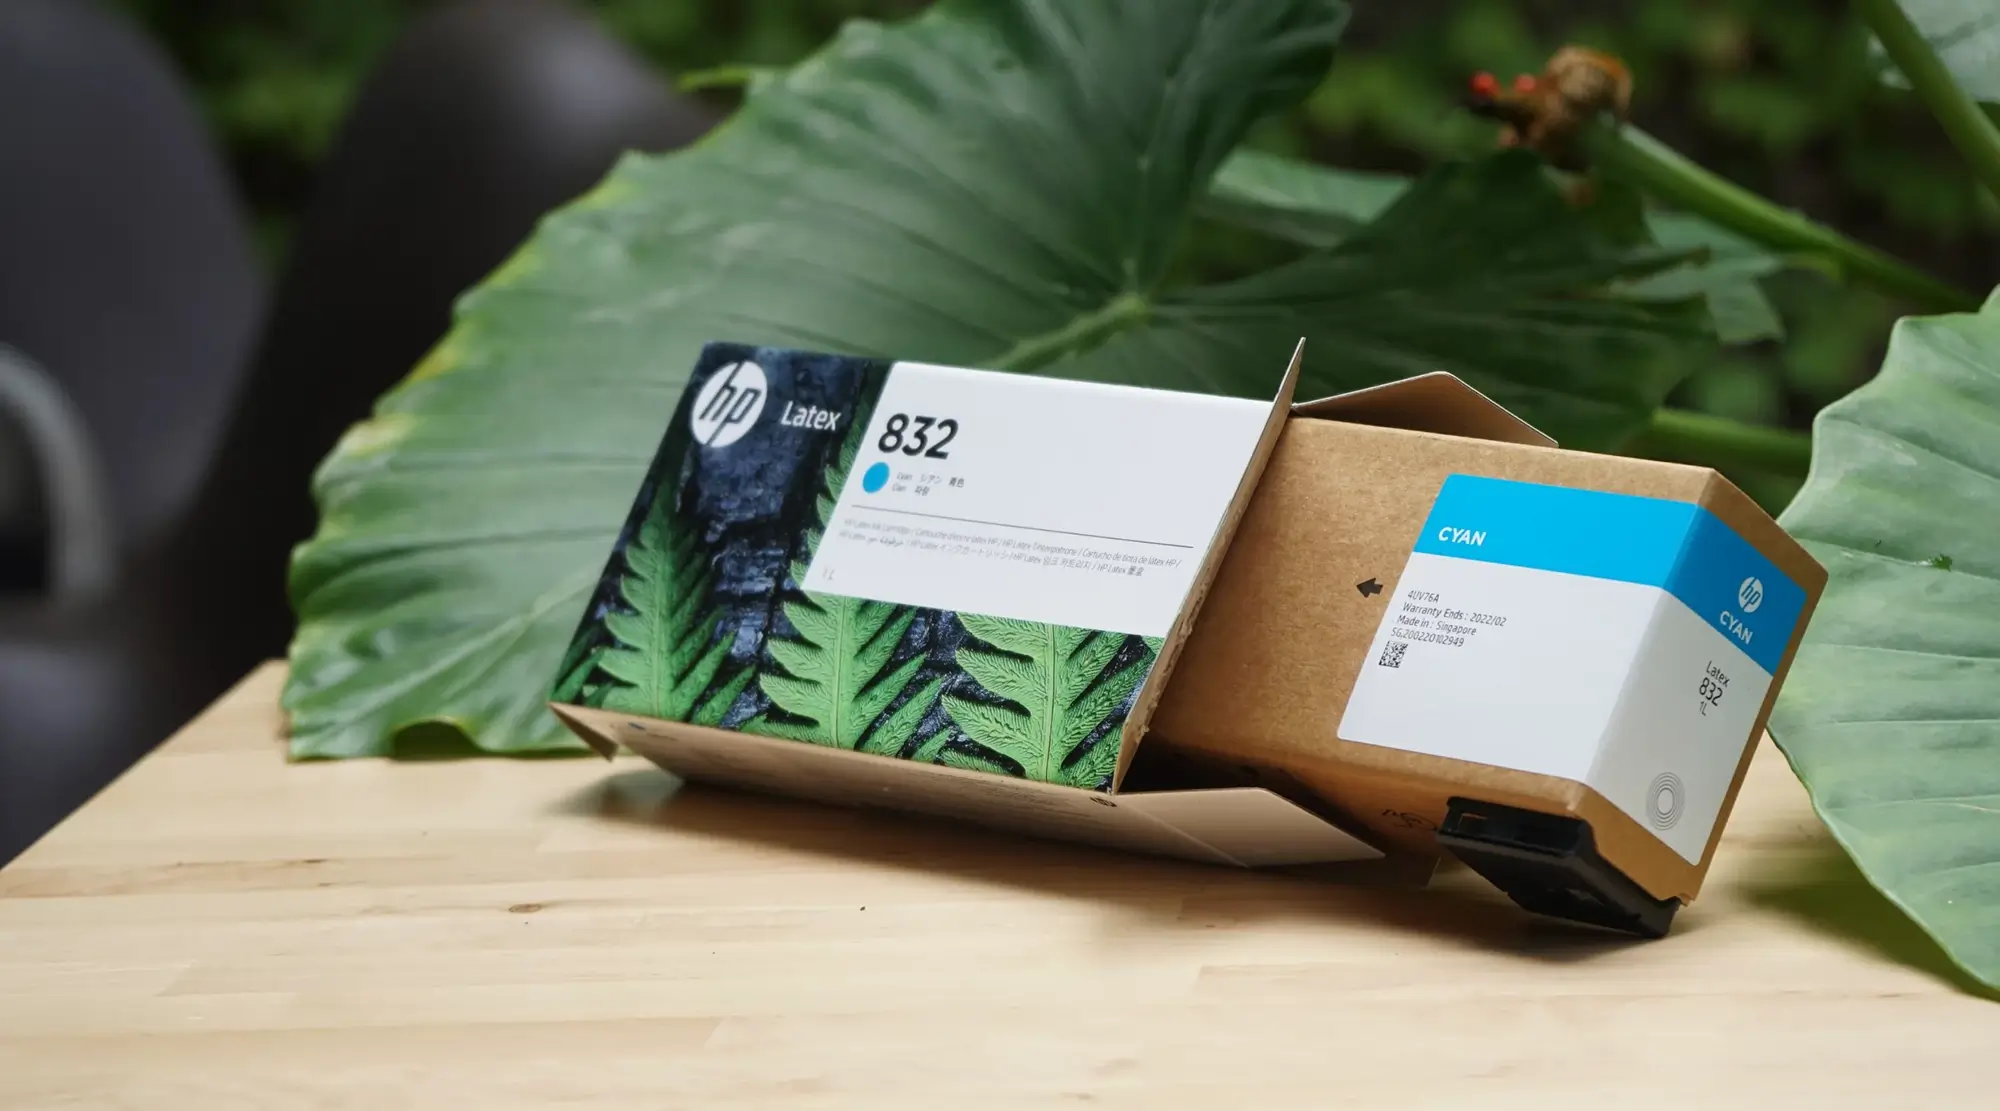 Packaging by Nacar Design for HP